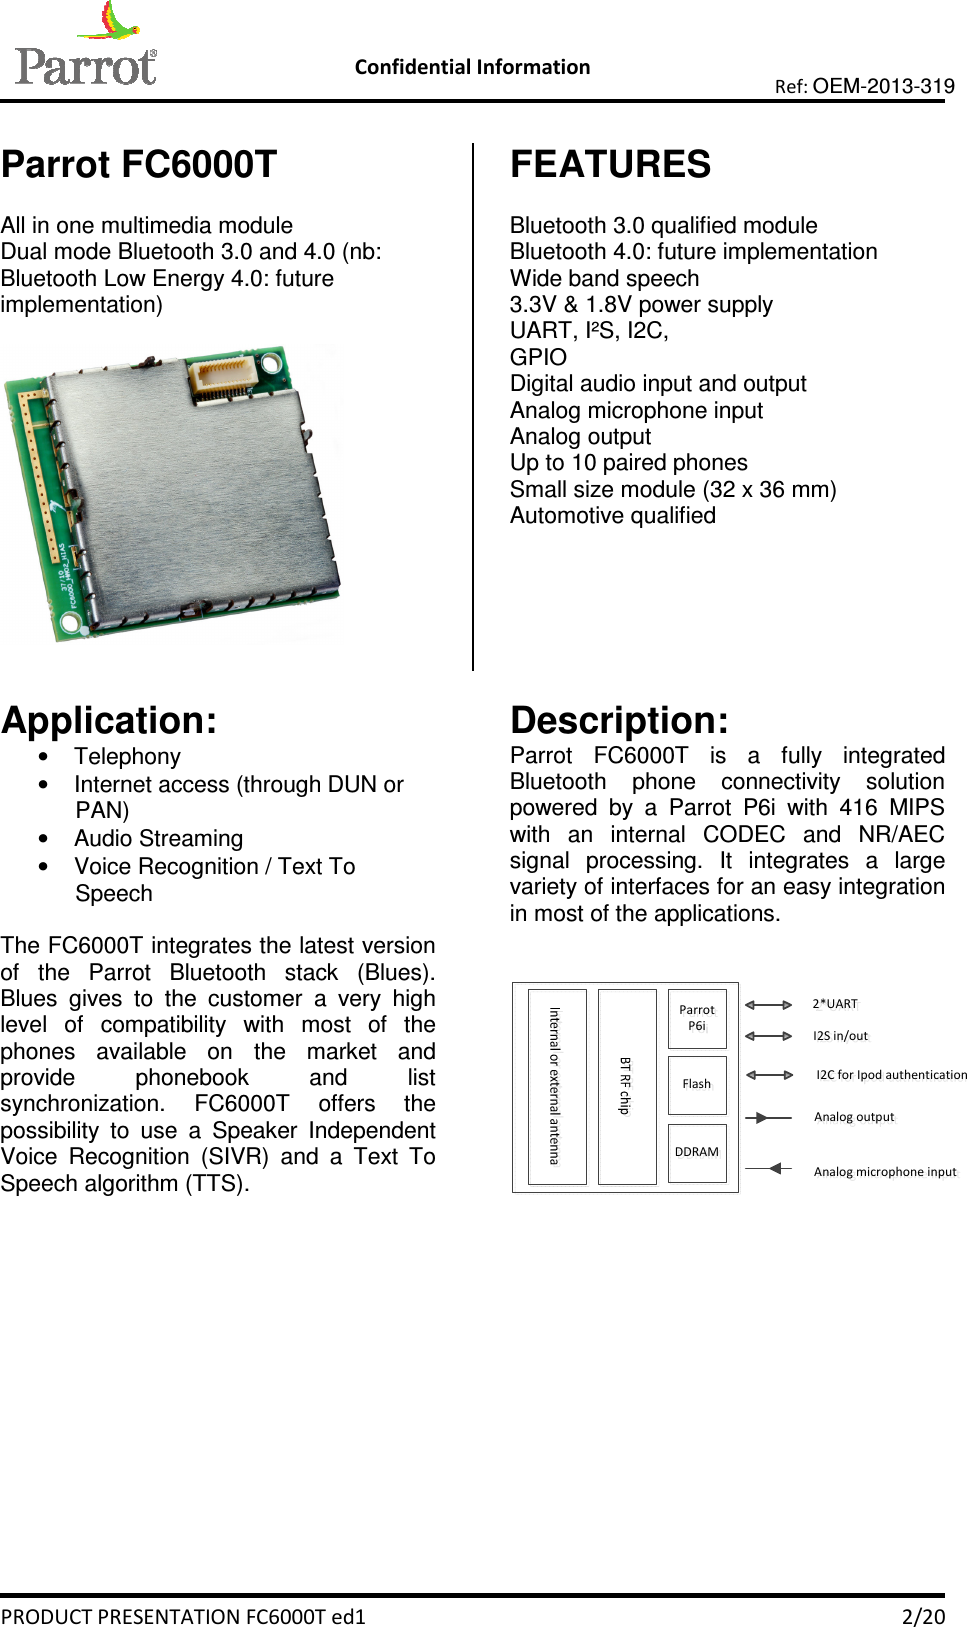   Confidential Information   PRODUCT PRESENTATION FC6000T ed1    2/20 Ref: OEM-2013-319  Parrot FC6000T  All in one multimedia module Dual mode Bluetooth 3.0 and 4.0 (nb: Bluetooth Low Energy 4.0: future implementation)    FEATURES  Bluetooth 3.0 qualified module Bluetooth 4.0: future implementation Wide band speech 3.3V &amp; 1.8V power supply UART, I²S, I2C,  GPIO Digital audio input and output Analog microphone input  Analog output Up to 10 paired phones Small size module (32 x 36 mm) Automotive qualified   Application: •  Telephony •  Internet access (through DUN or PAN) •  Audio Streaming •  Voice Recognition / Text To Speech  The FC6000T integrates the latest version of  the  Parrot  Bluetooth  stack  (Blues). Blues  gives  to  the  customer  a  very  high level  of  compatibility  with  most  of  the phones  available  on  the  market  and provide  phonebook  and  list synchronization.  FC6000T  offers  the possibility  to  use  a  Speaker  Independent Voice  Recognition  (SIVR)  and  a  Text  To Speech algorithm (TTS).       Description: Parrot  FC6000T  is  a  fully  integrated Bluetooth  phone  connectivity  solution powered  by  a  Parrot  P6i  with  416  MIPS with  an  internal  CODEC  and  NR/AEC signal  processing.  It  integrates  a  large variety of interfaces for an easy integration in most of the applications.    ParrotP6iFlashDDRAMAnalog outputAnalog microphone inputI2S in/out2*UARTI2C for Ipod authentication    